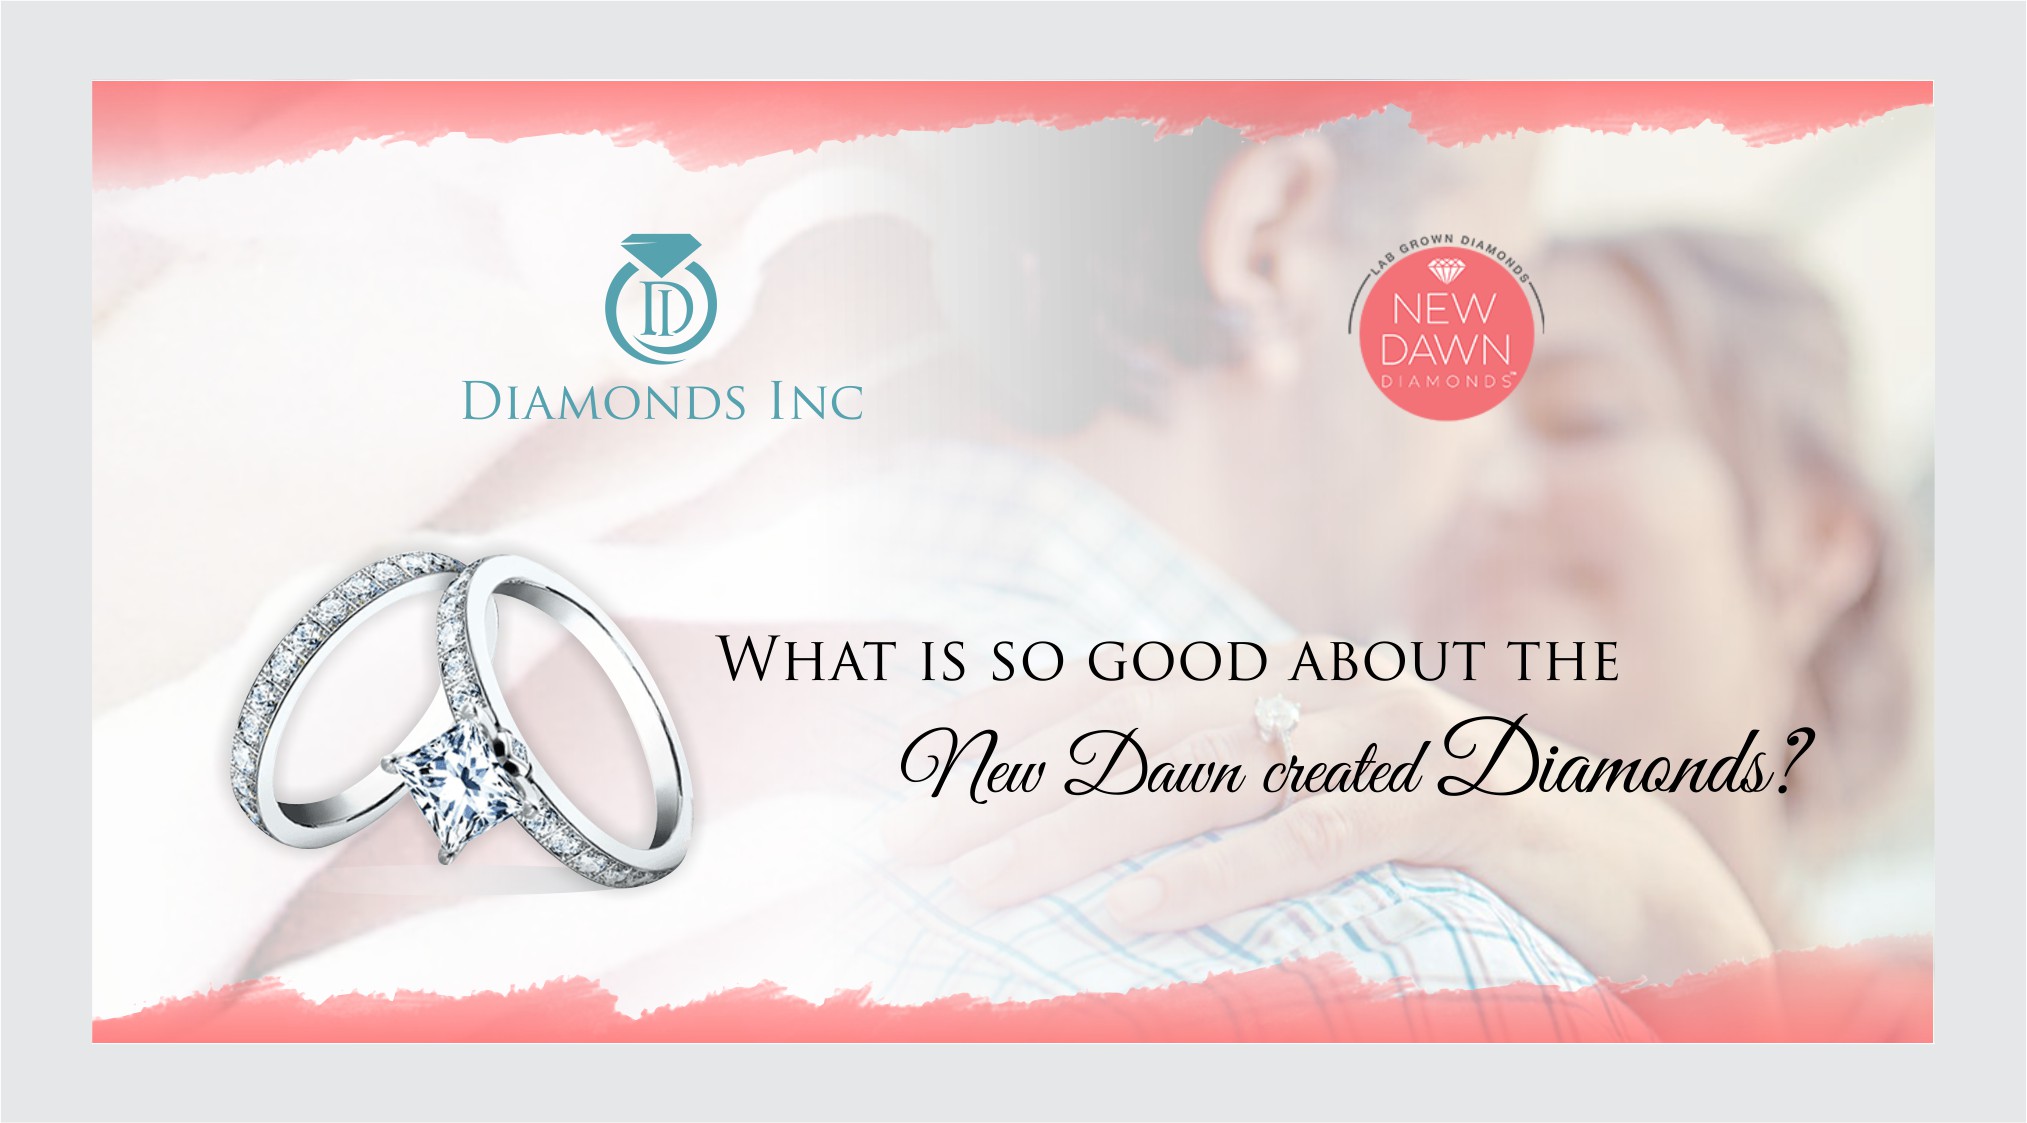 What Is So Good About New Dawn Created Diamonds?